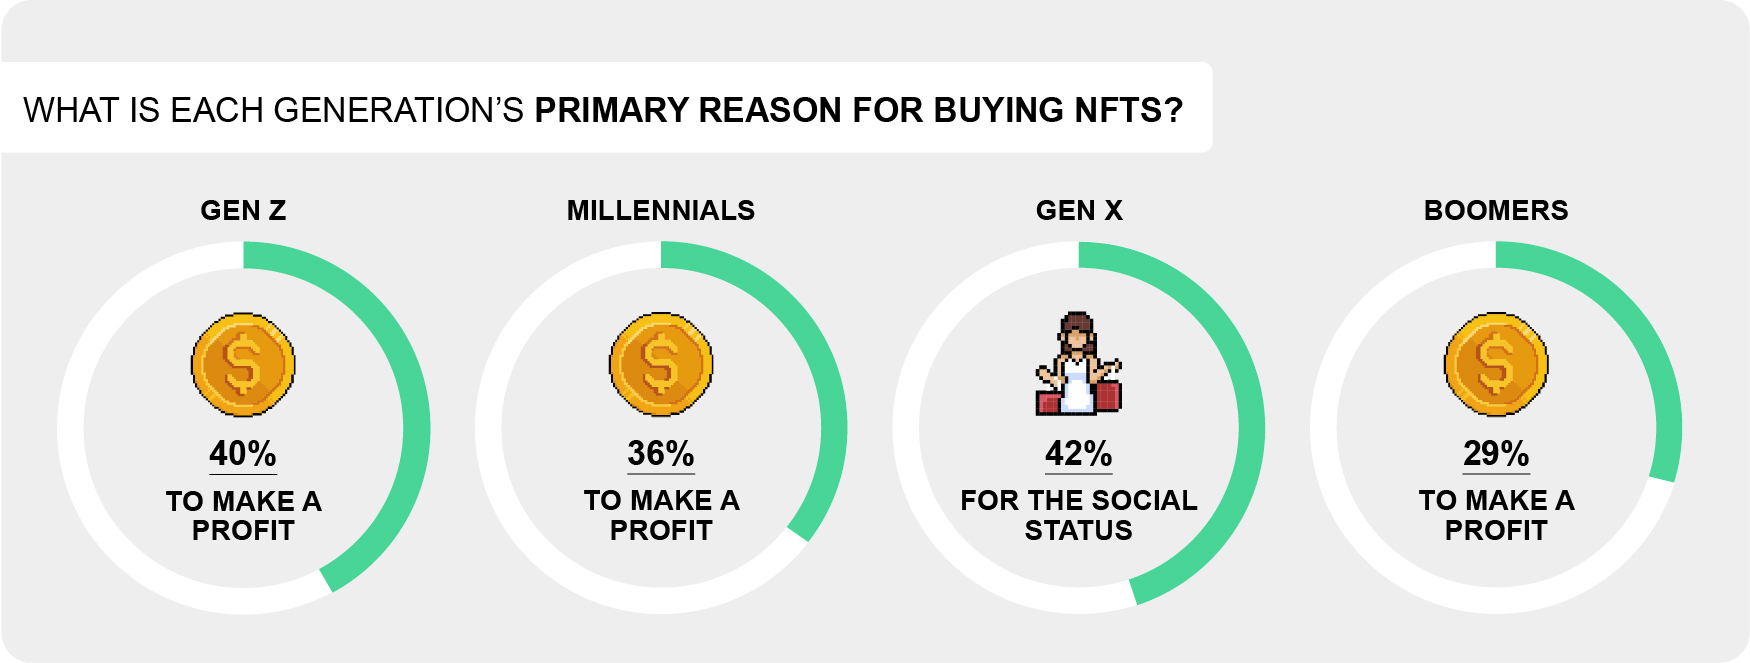 What is each generation’s primary reason for buying NFTs?